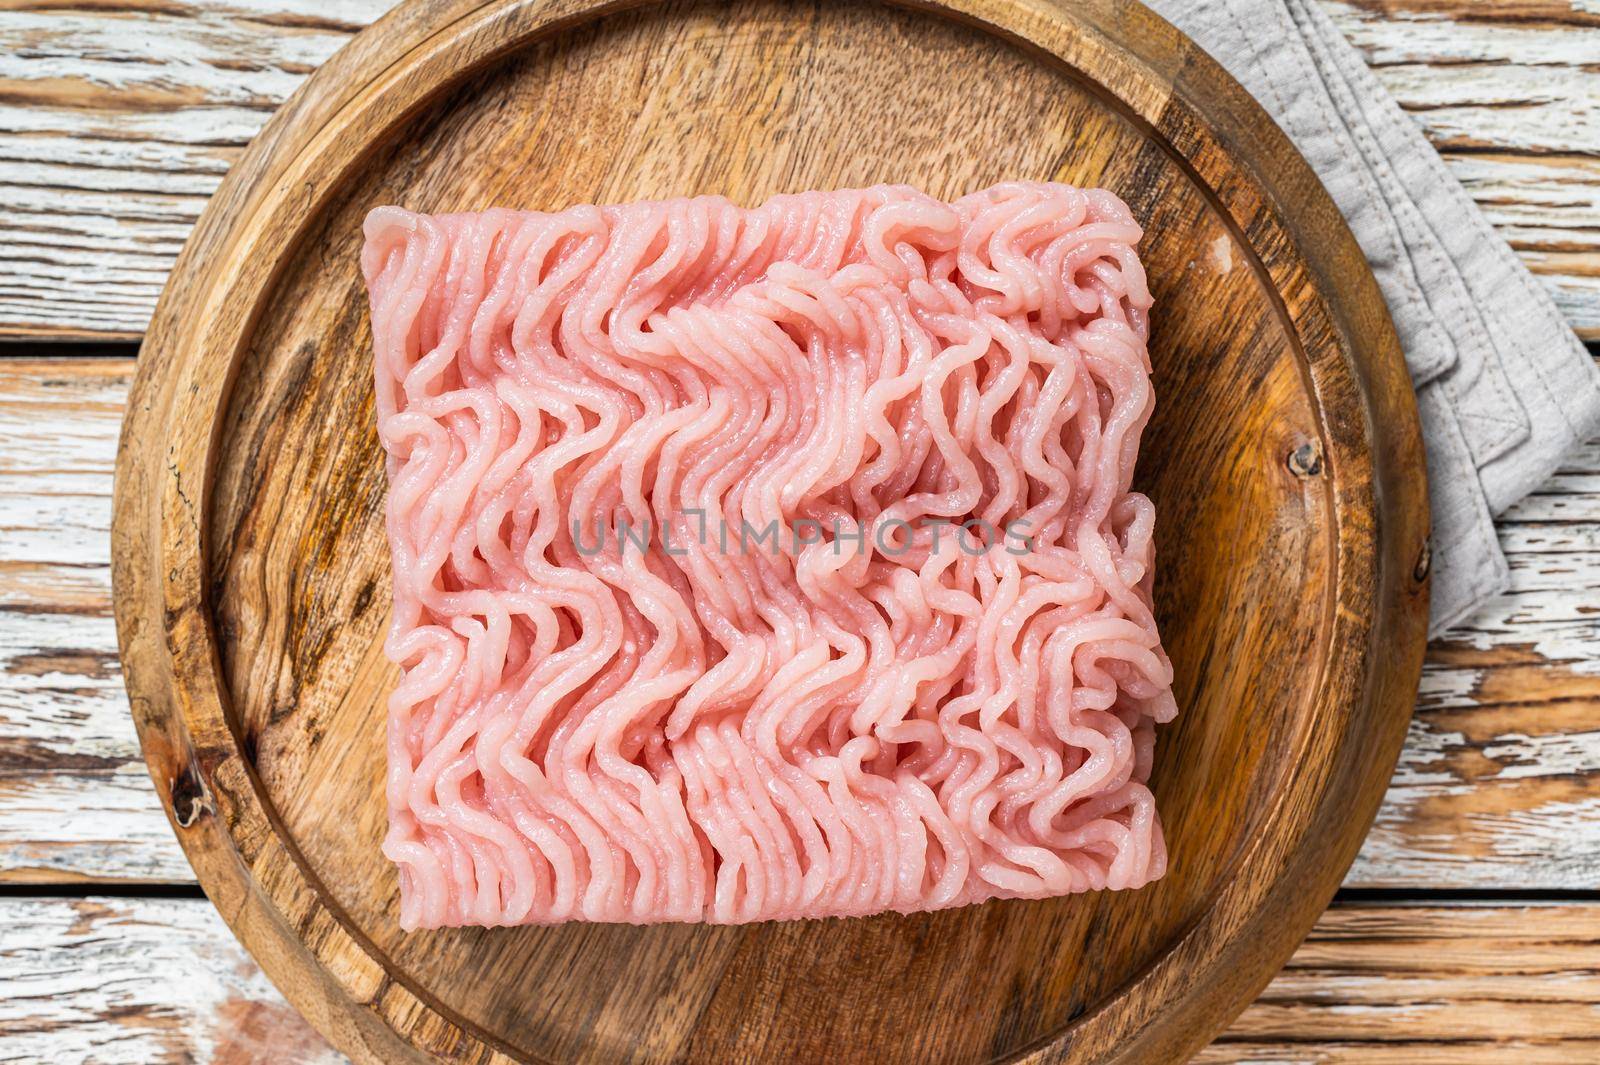 Raw mince or ground chicken meat on wooden board. White background. Top view by Composter